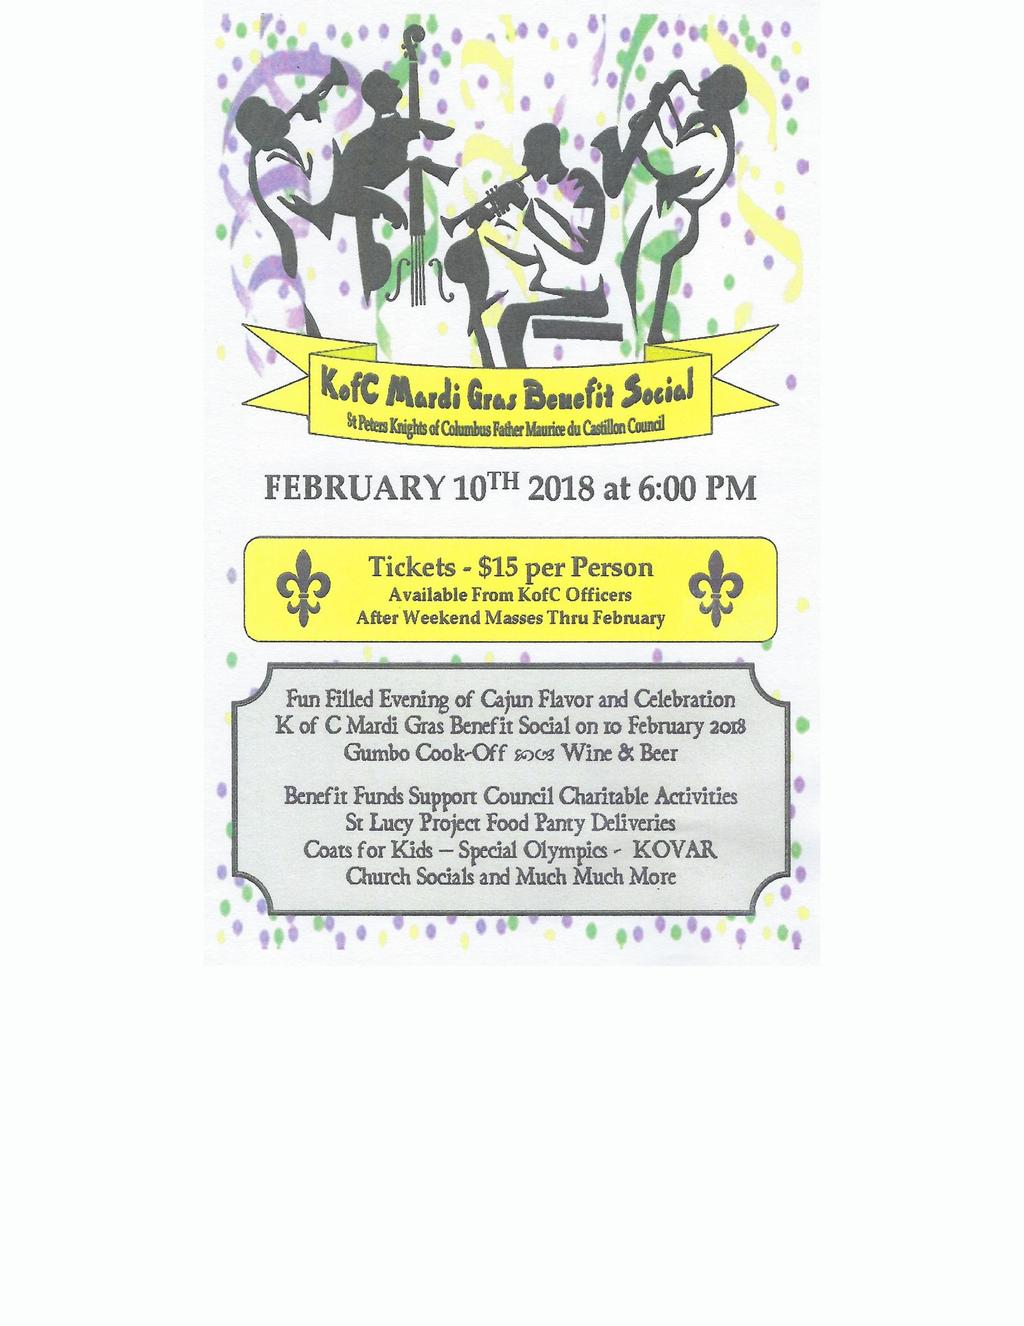 FEBRUARY 10TH 2018 at 6:00 PM Tickets - $15 per Person Available From Kofe Officers After Weekend Masses Thru February Fun FIlled Evening of Cajun Flavor and Celebration K of C Mardi Gras Benefit